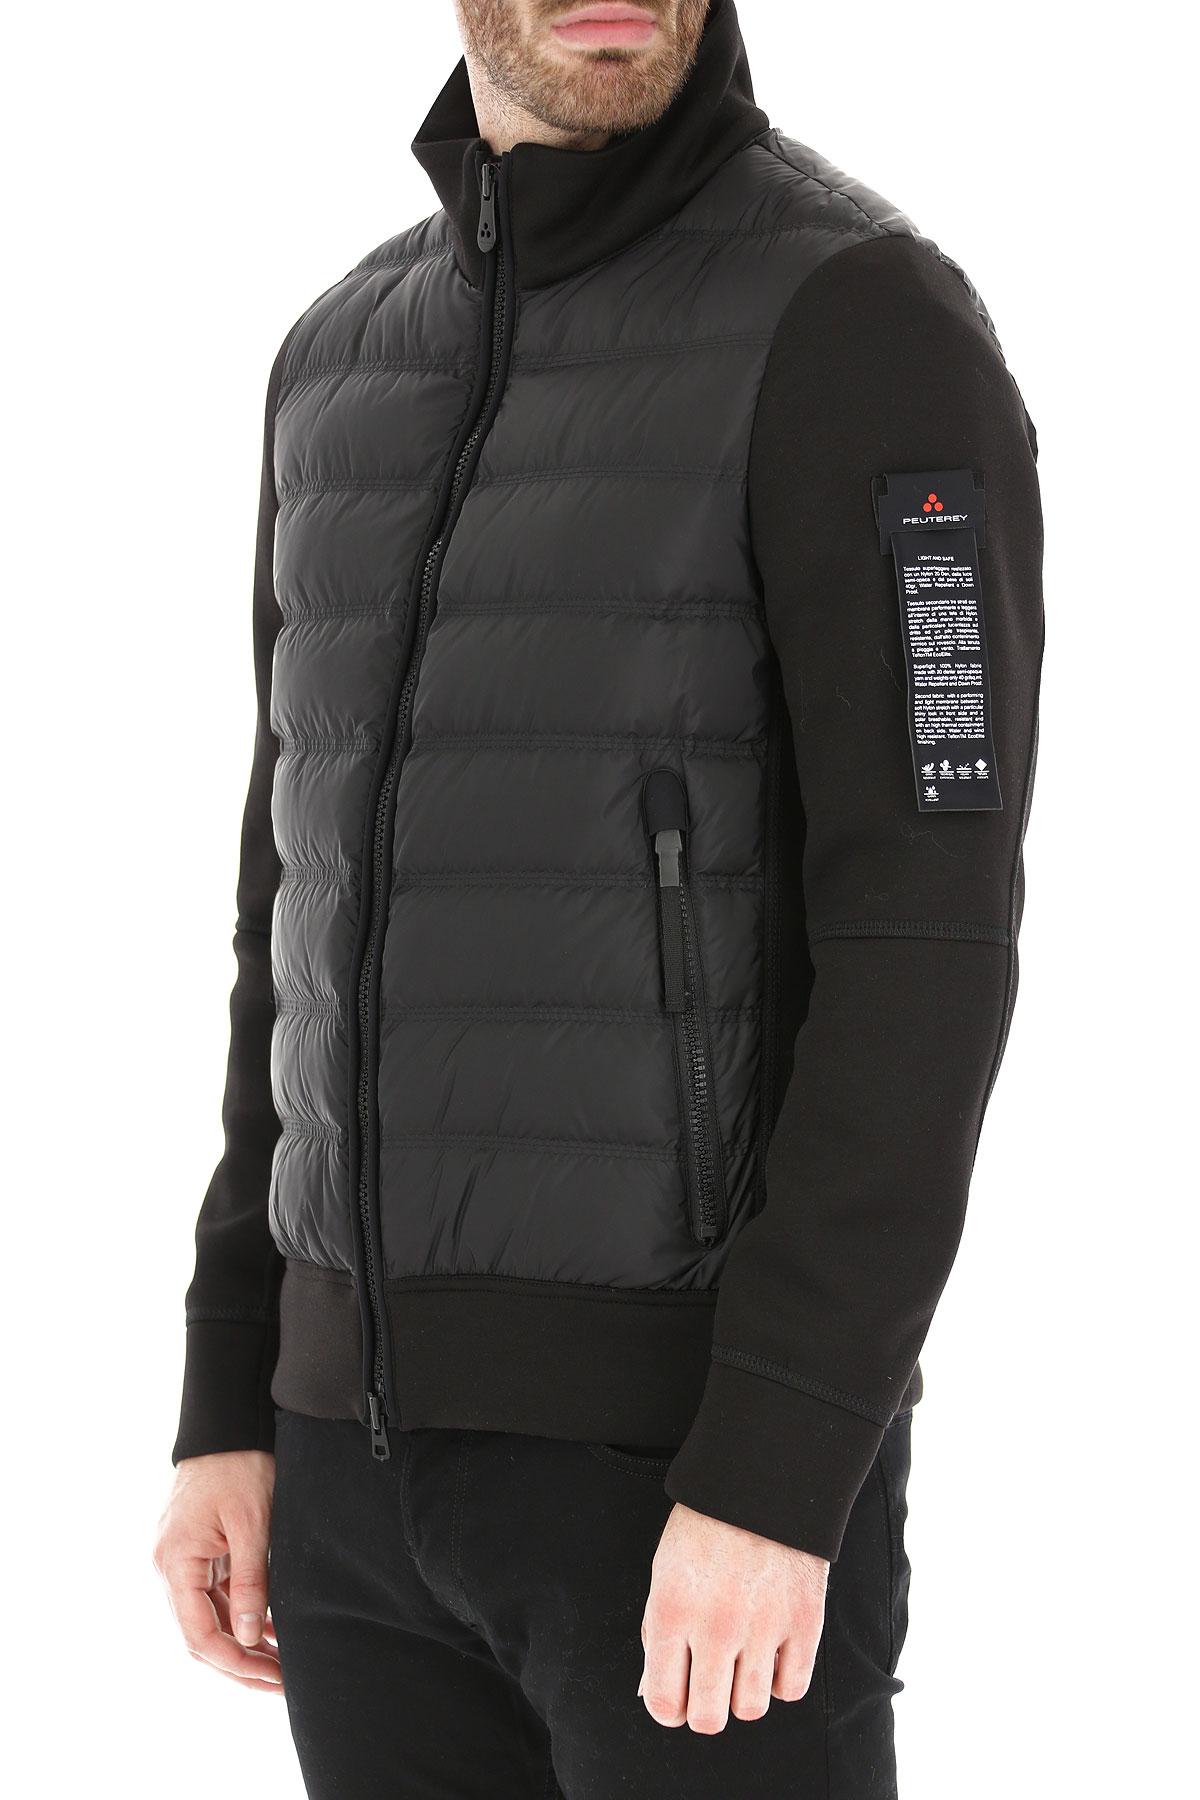 Peuterey Synthetic Down Jacket For Men in Black for Men - Lyst